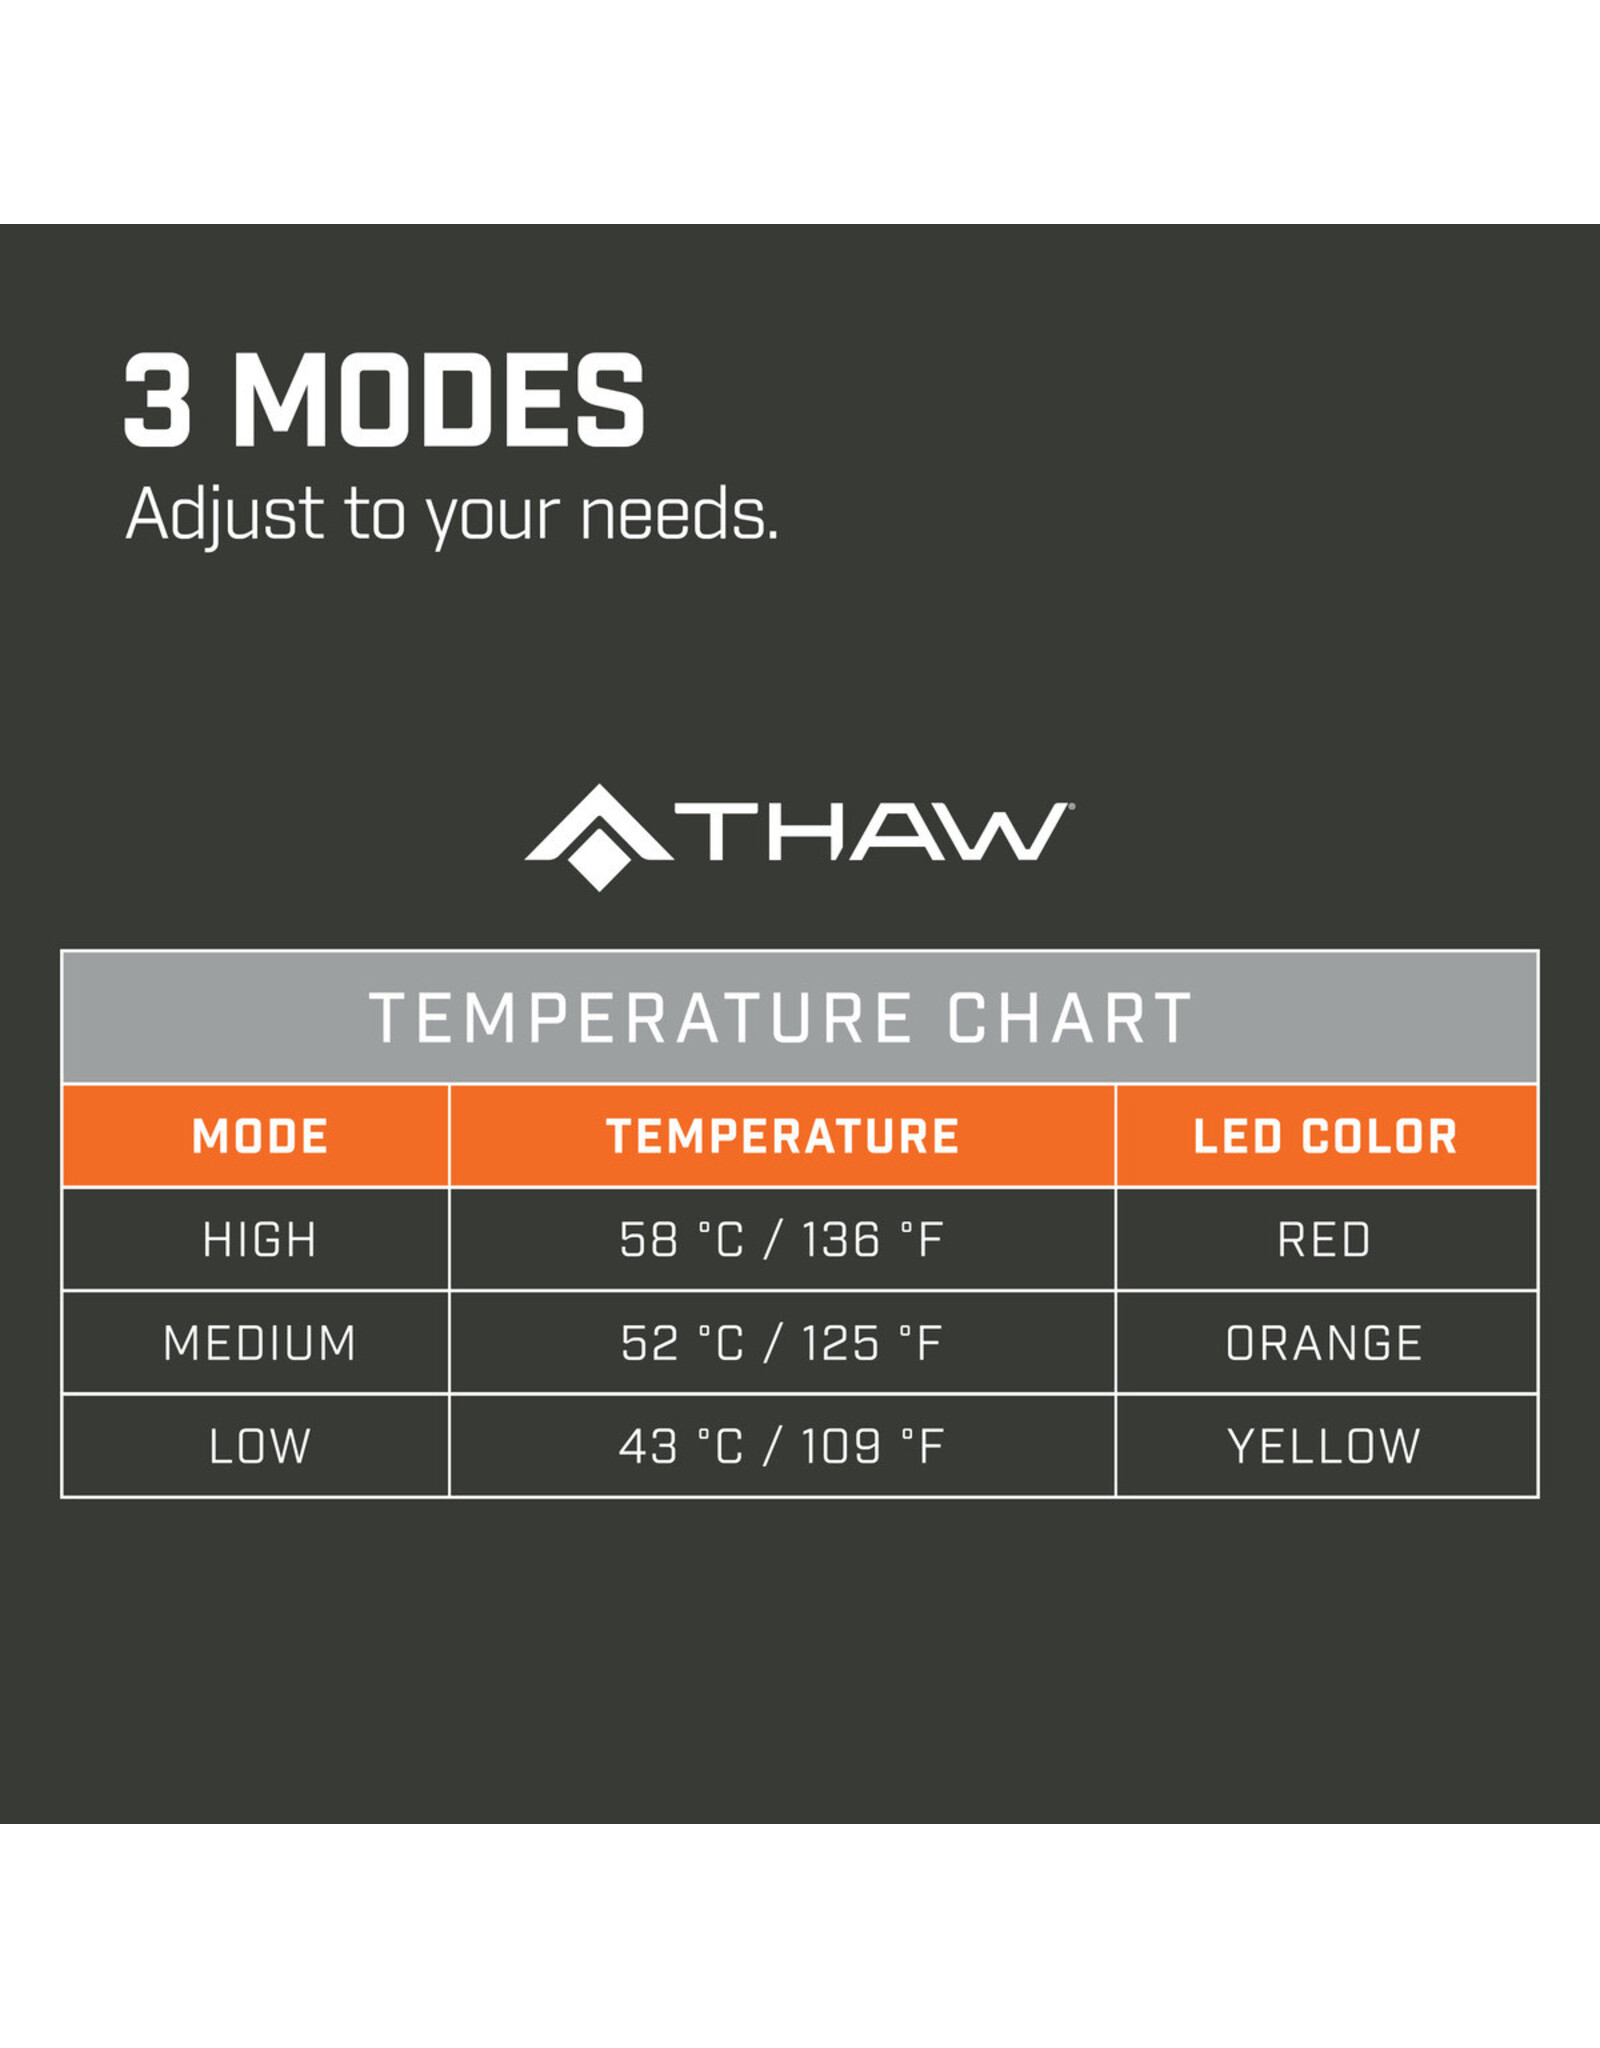 Thaw Rechargeable Heated Seatpad - 5 hours of heat - Includes Power bank battery